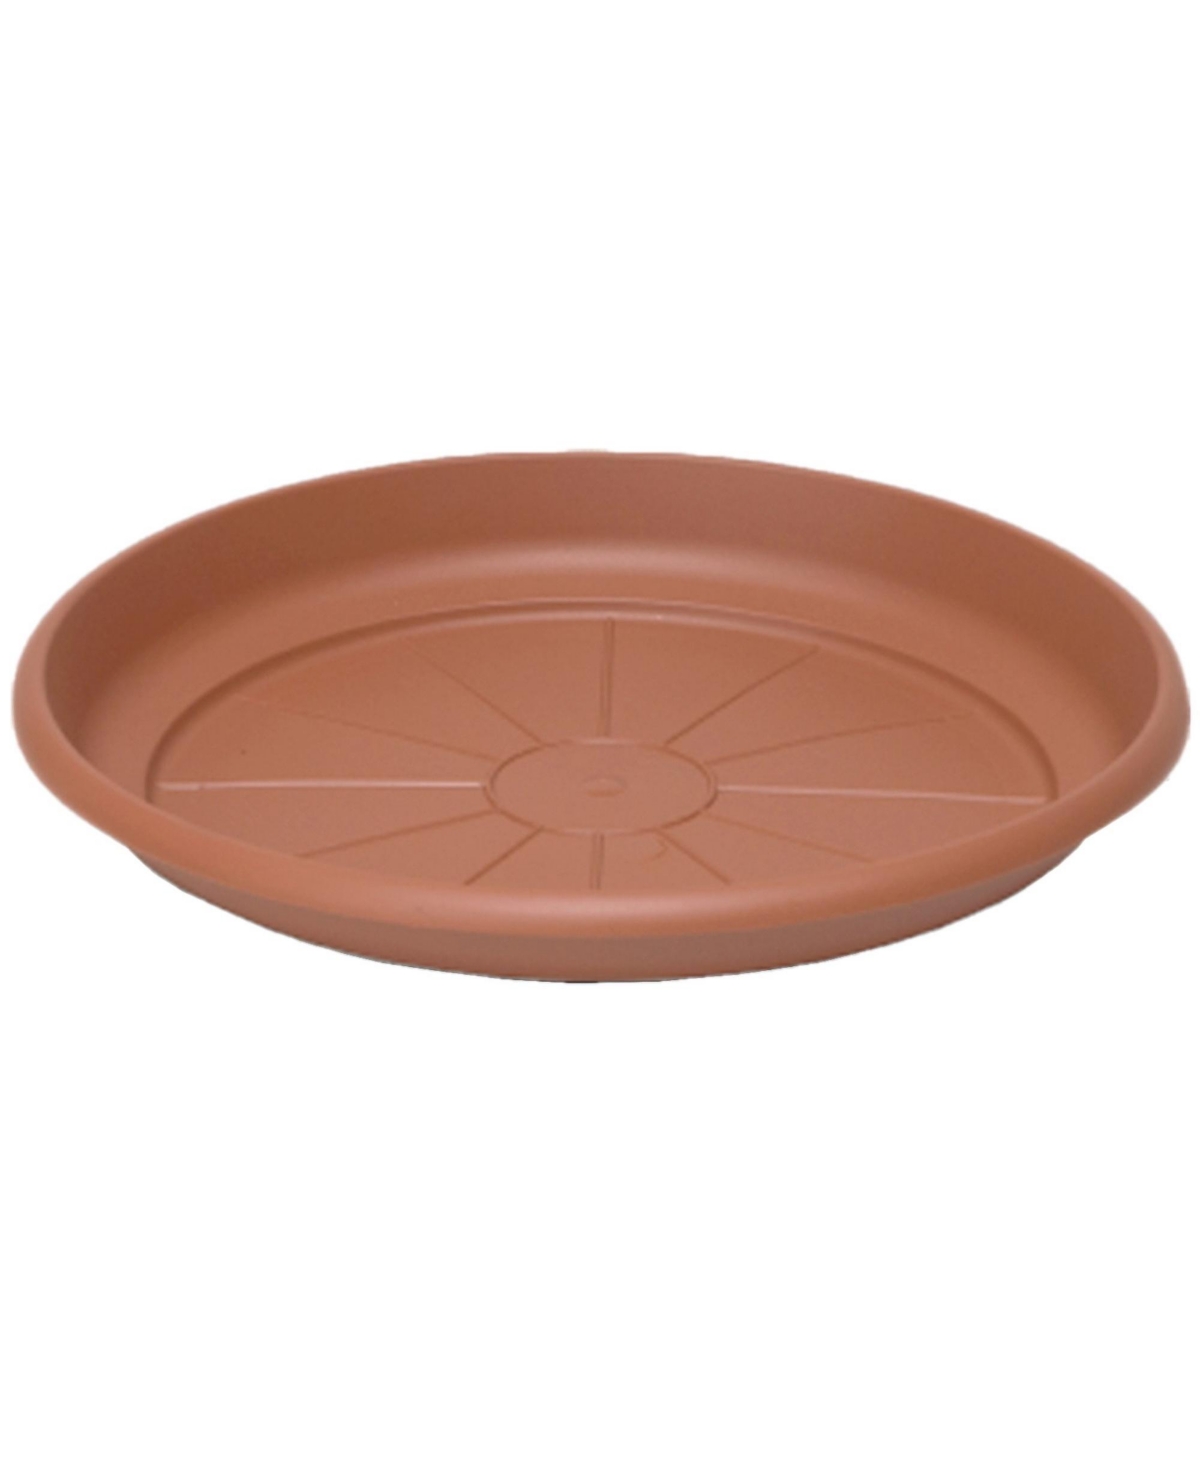 In Outdoor Emma Round Plastic Flower Pot Terracotta Colored Saucer, 12 Inches - Terracotta